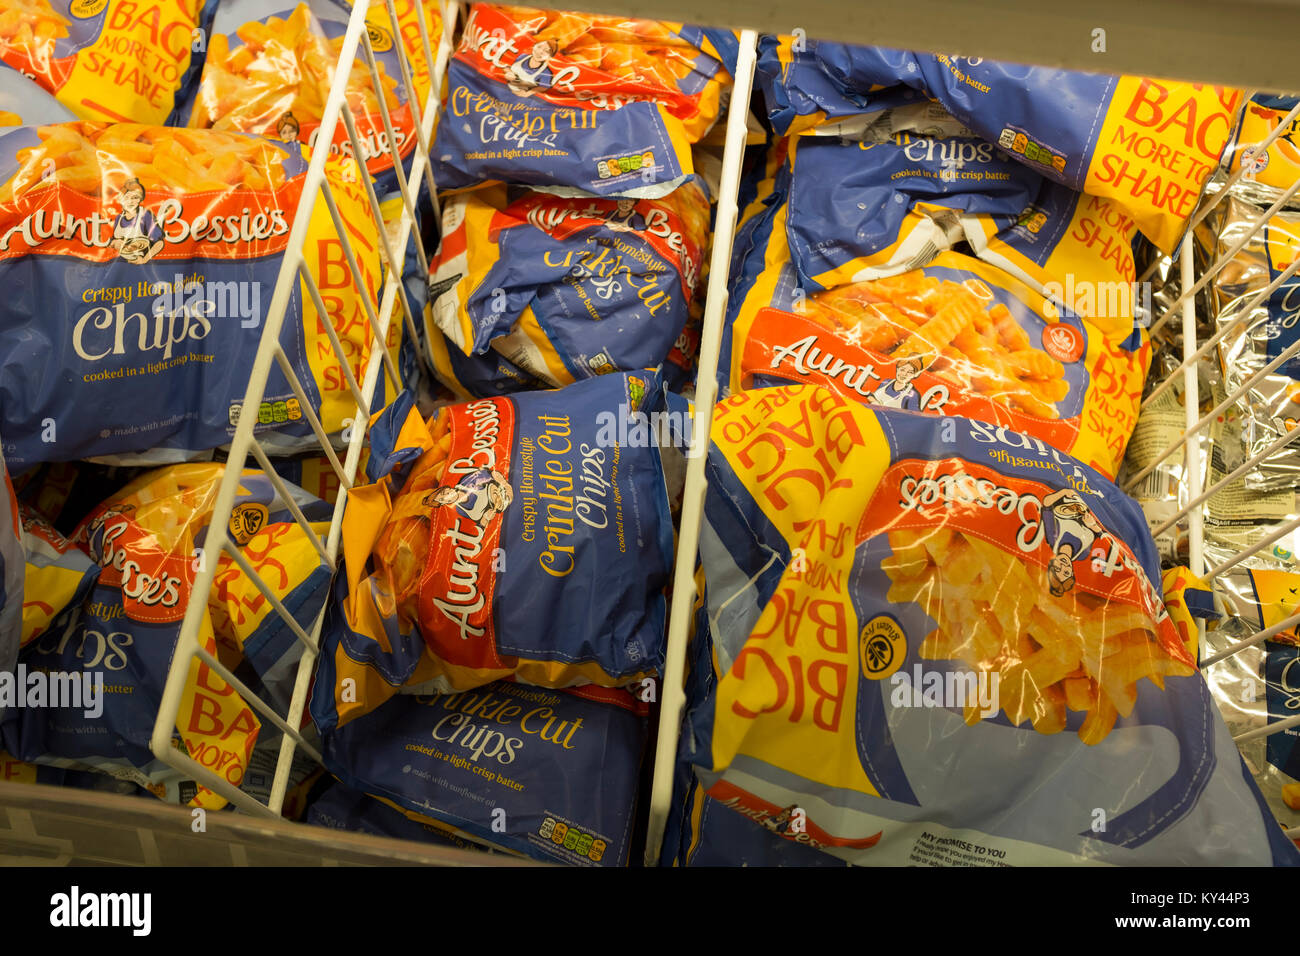 Frozen oven chips plastic packages in freezer at supermarket, UK Stock Photo